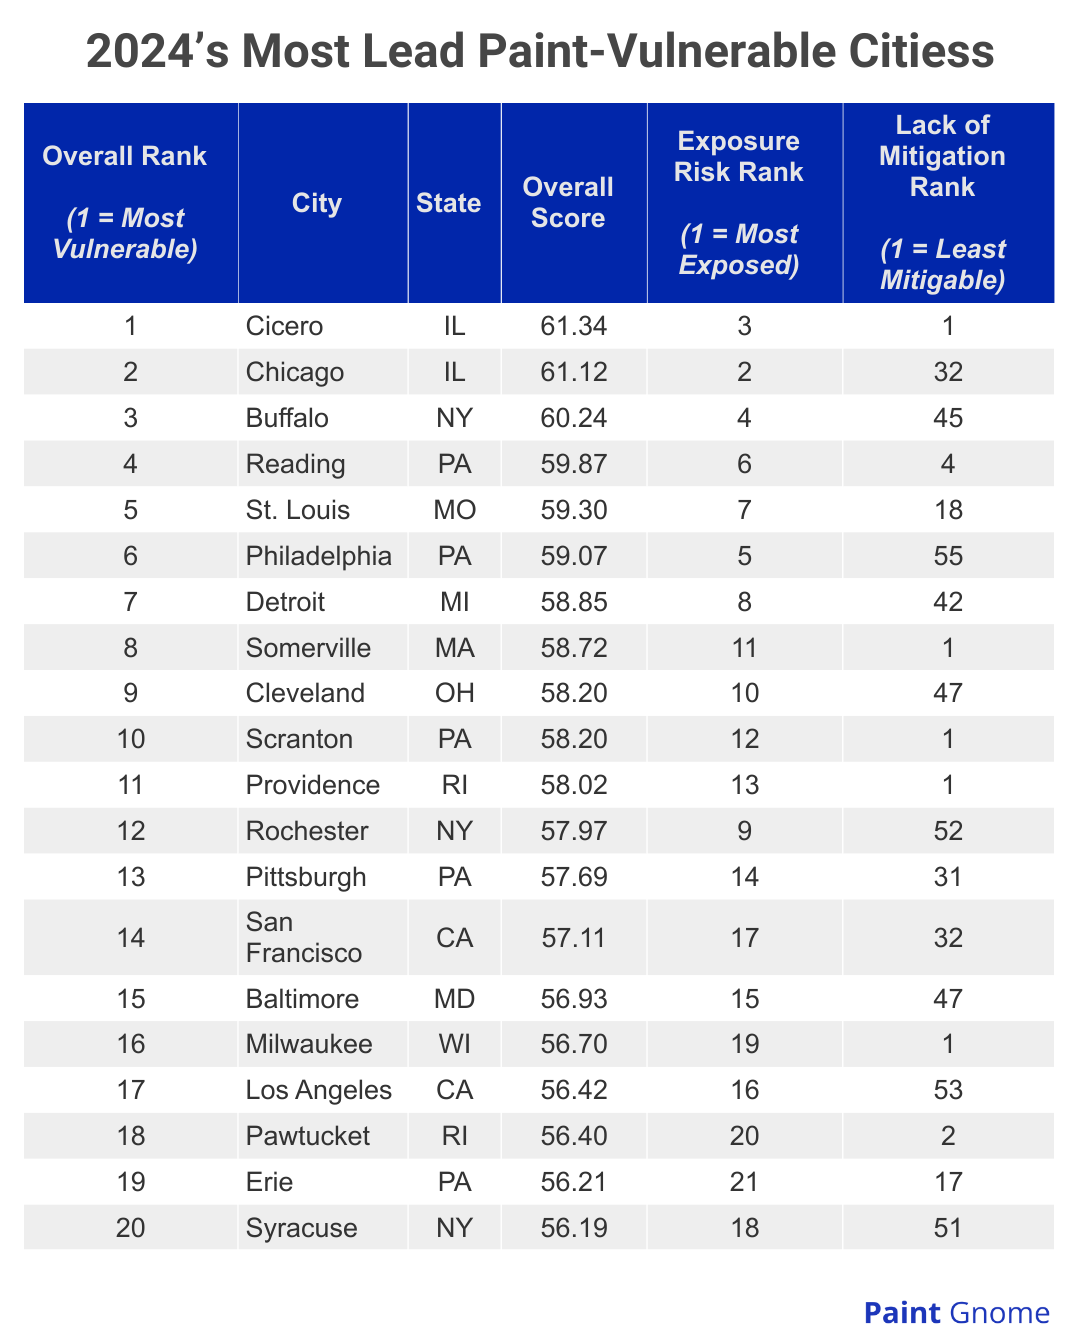 Table showing 2024’s Most Lead Paint-Vulnerable Cities